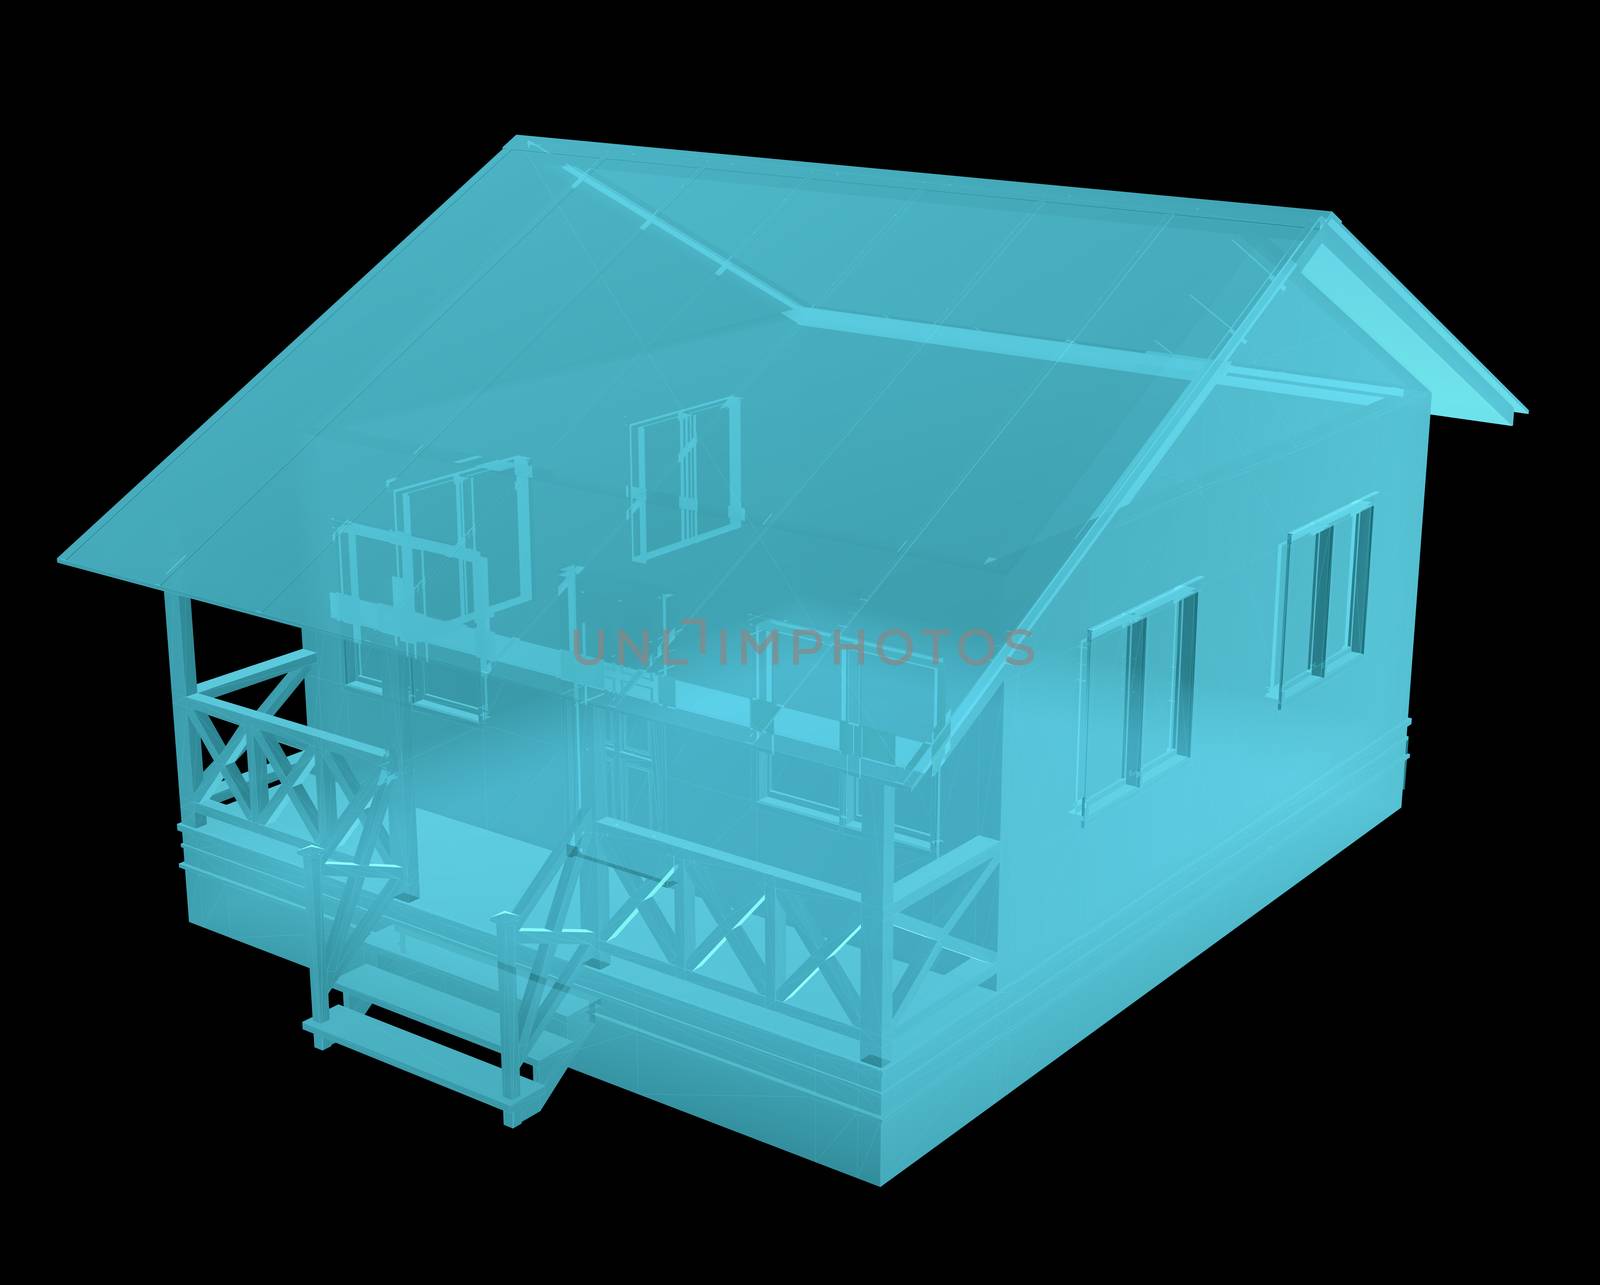 X-Ray Image Of Small House on Black Background. 3D rendering